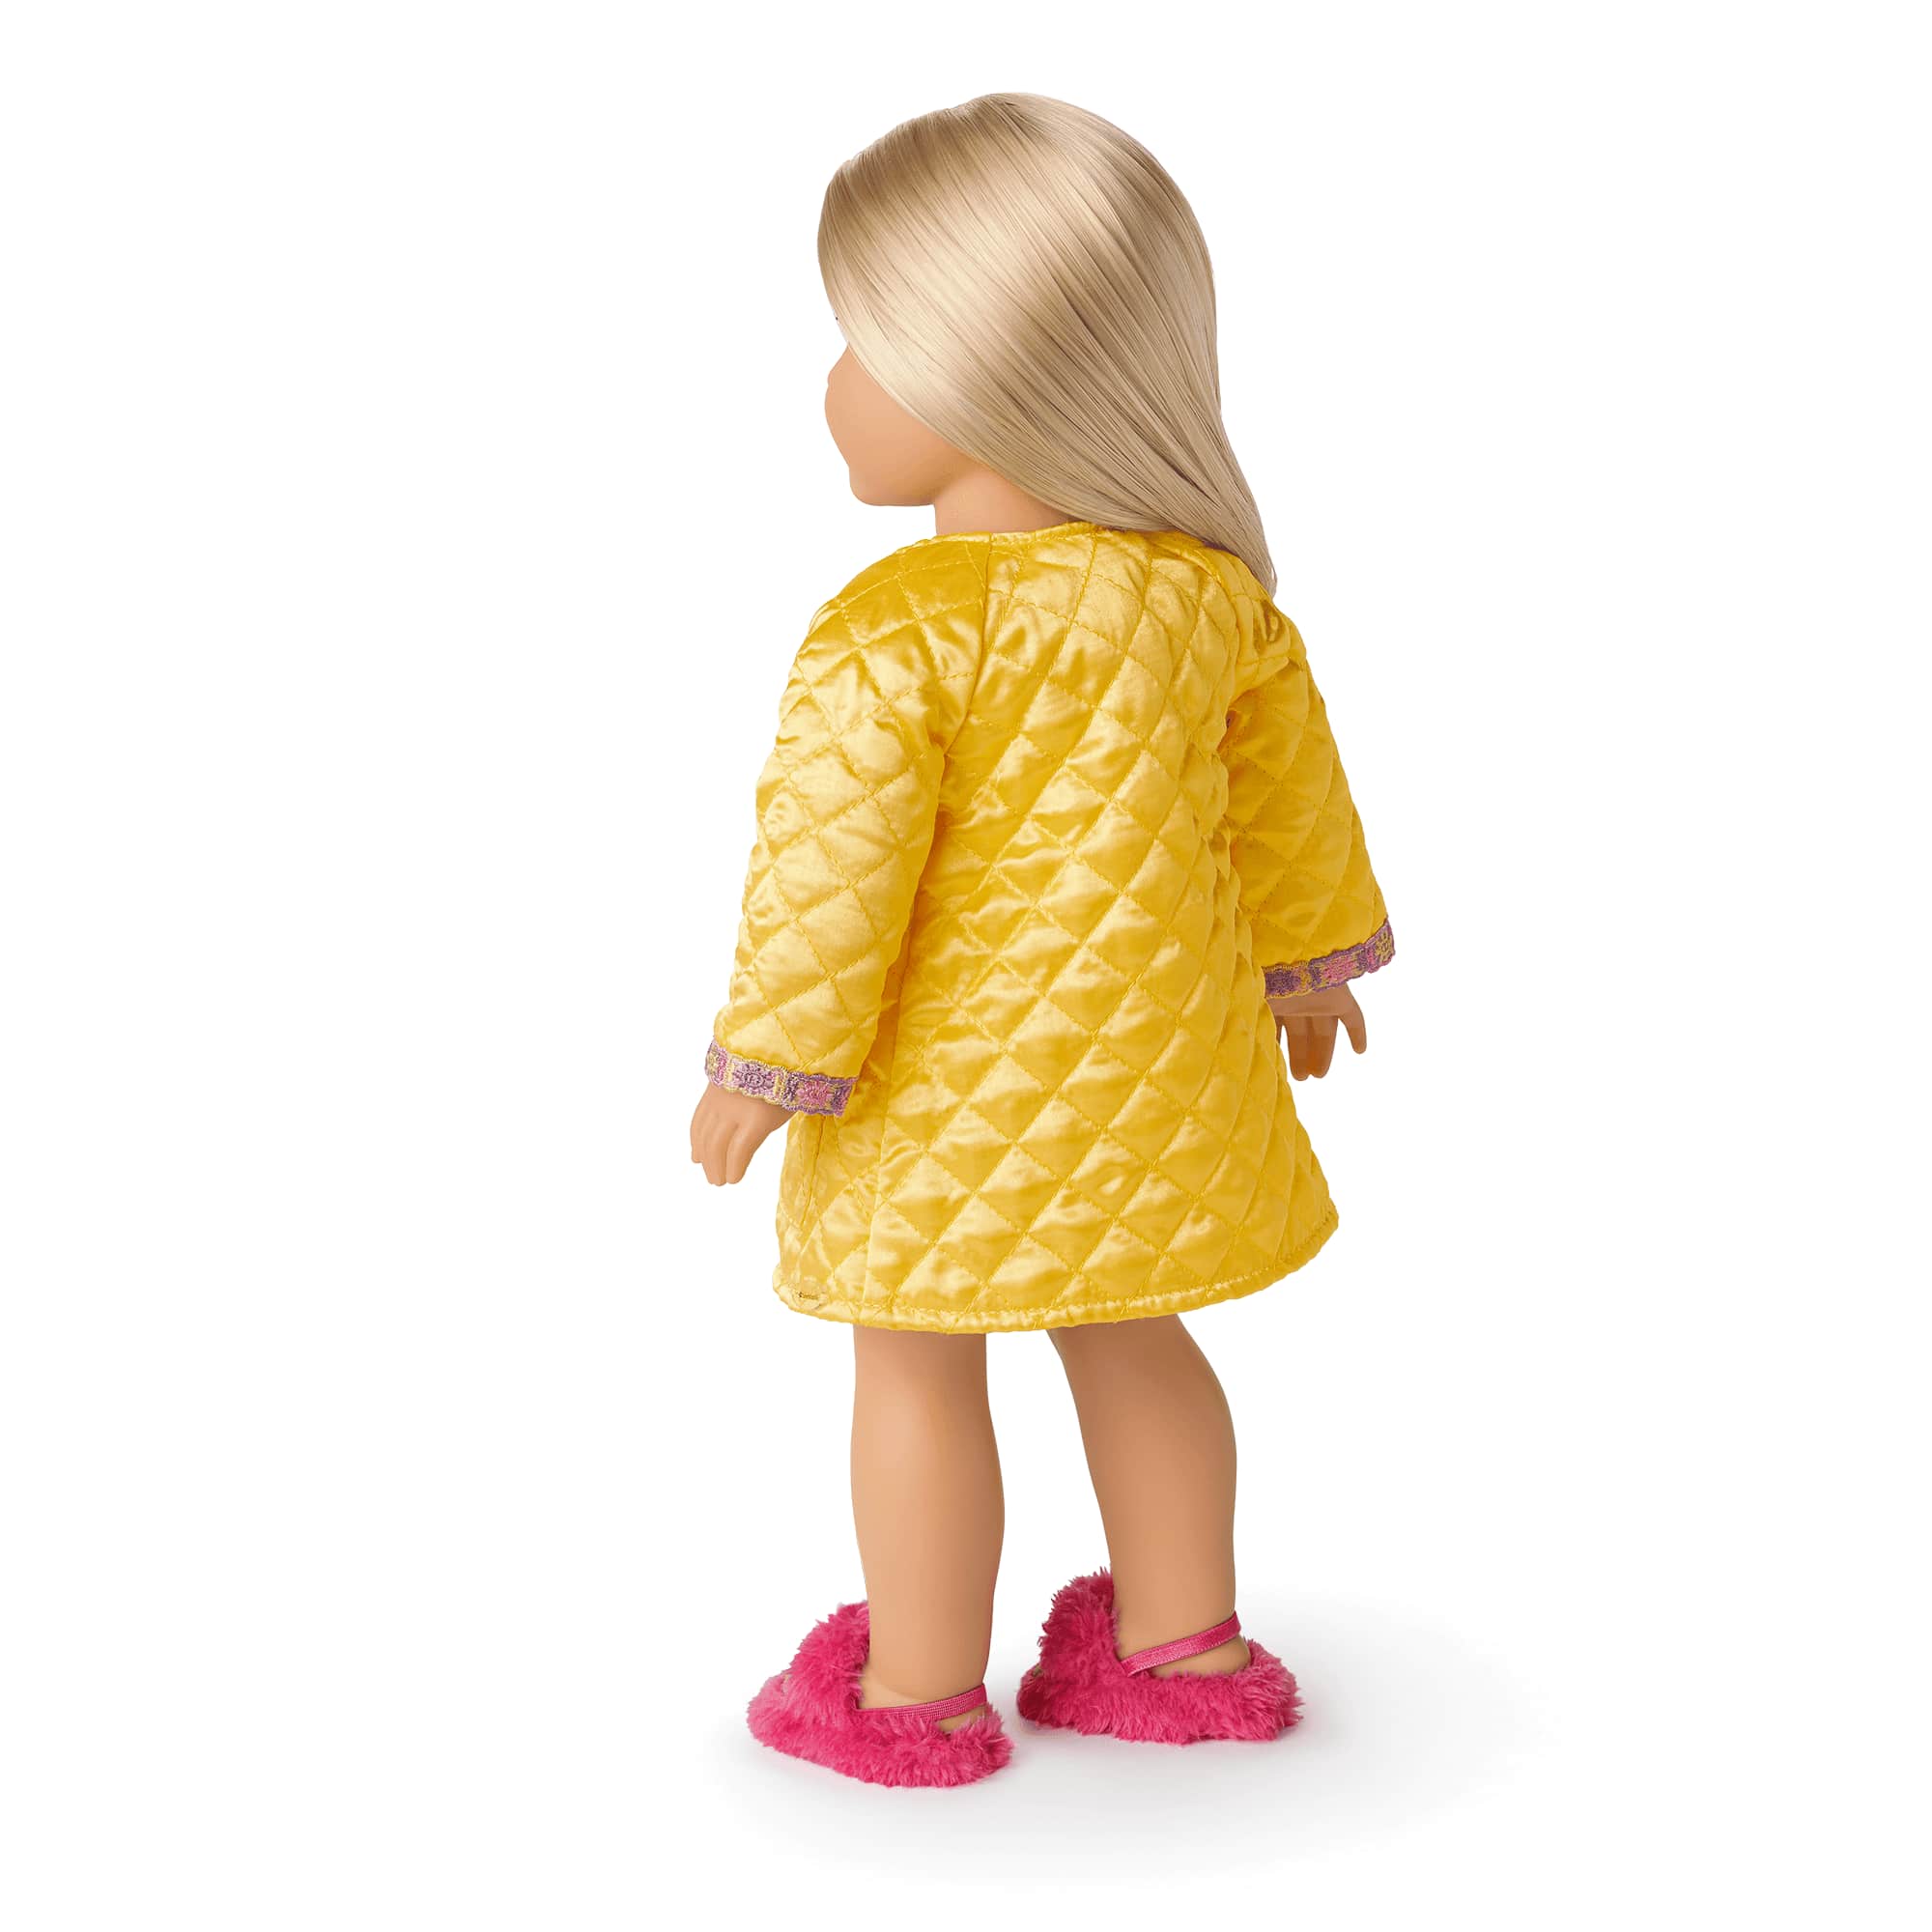 Julie’s™ Pajamas & Robe for 18-inch Dolls